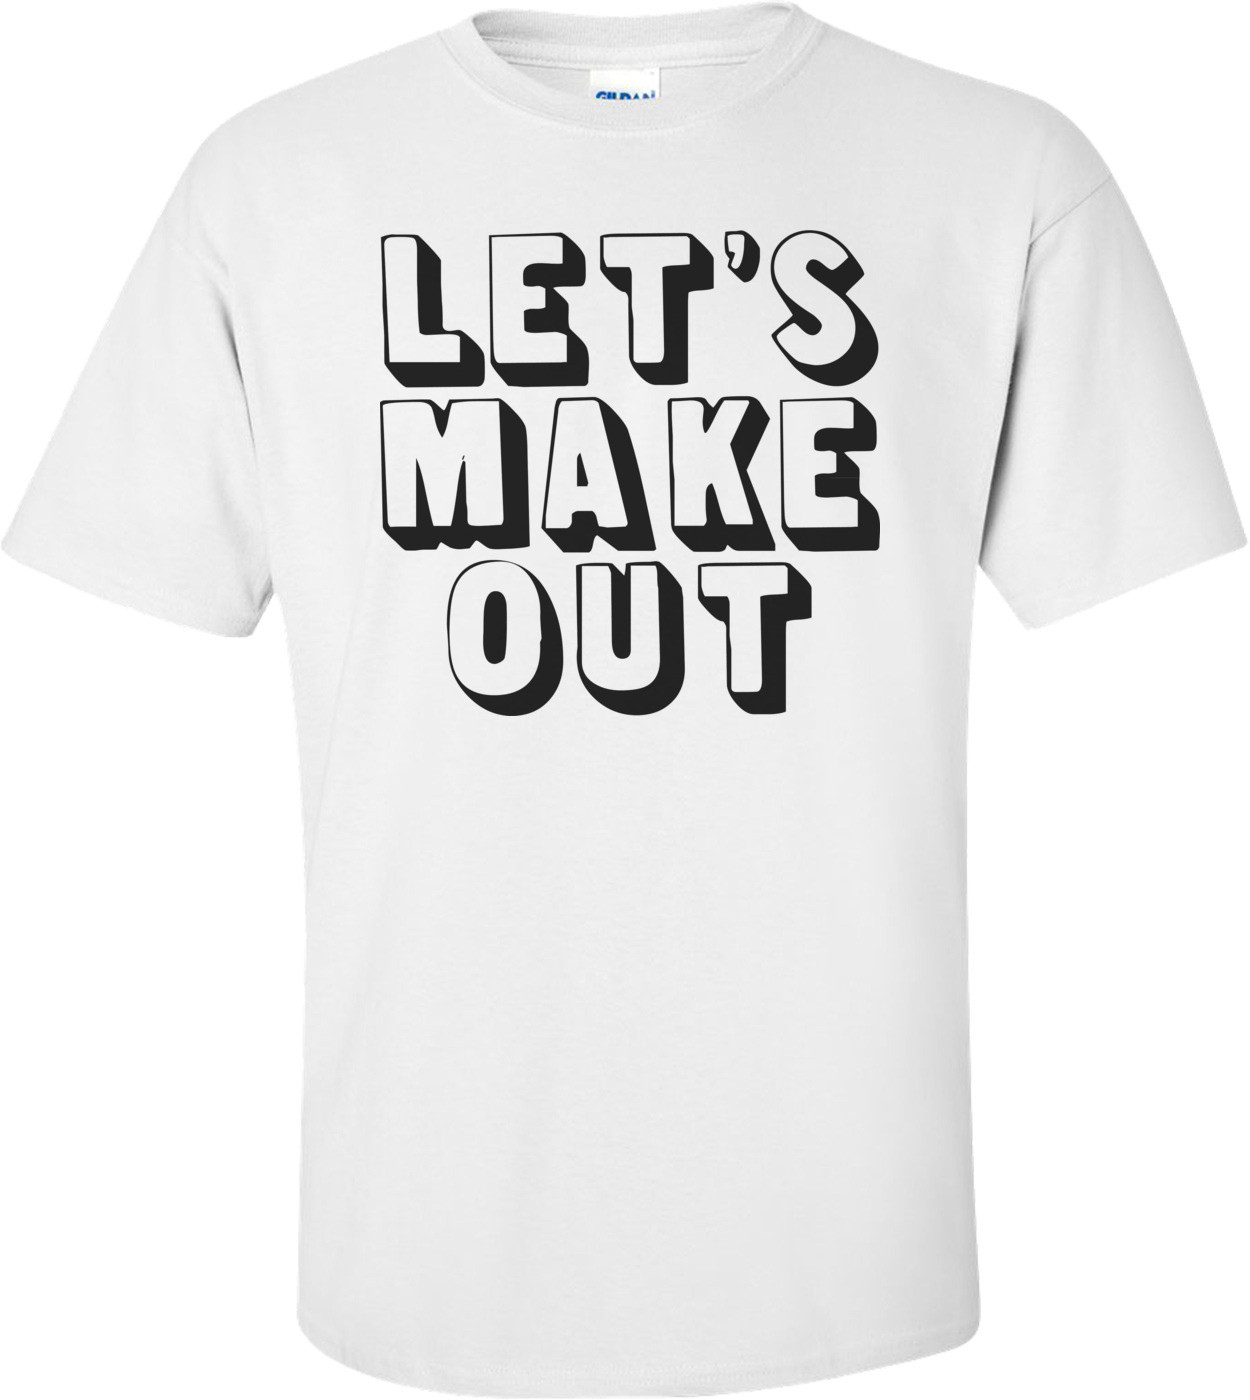 Let's Make Out Cool Shirt